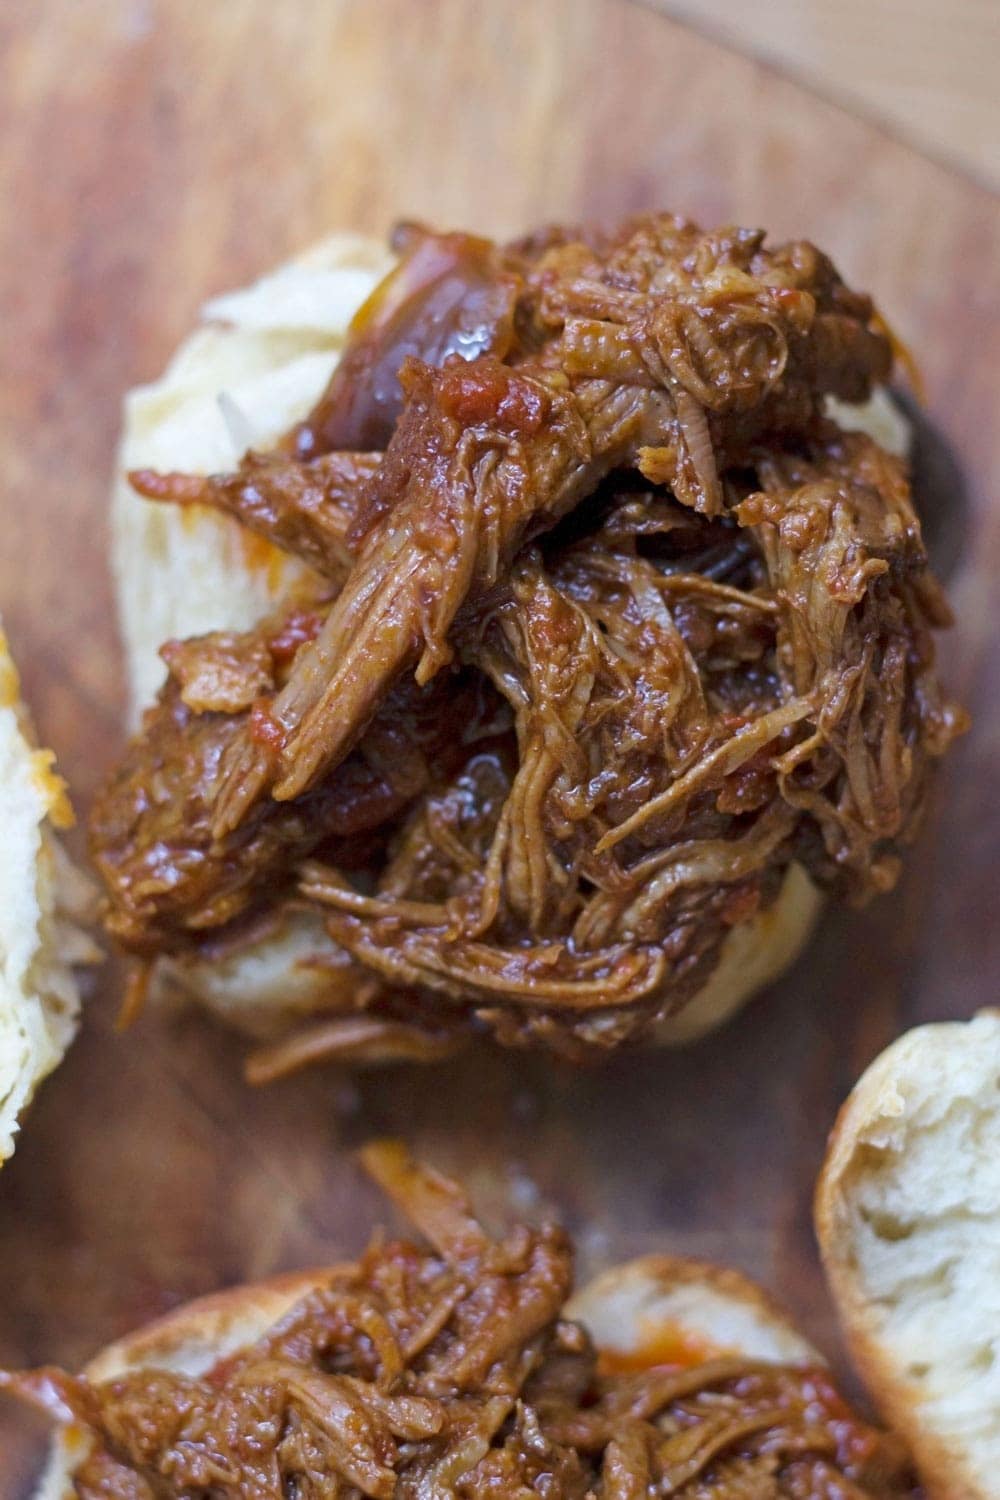 Beef brisket is slow cooked until meltingly tender for this spicy slow cooker pulled brisket. Serve in rolls or wraps for a delicious dinner!